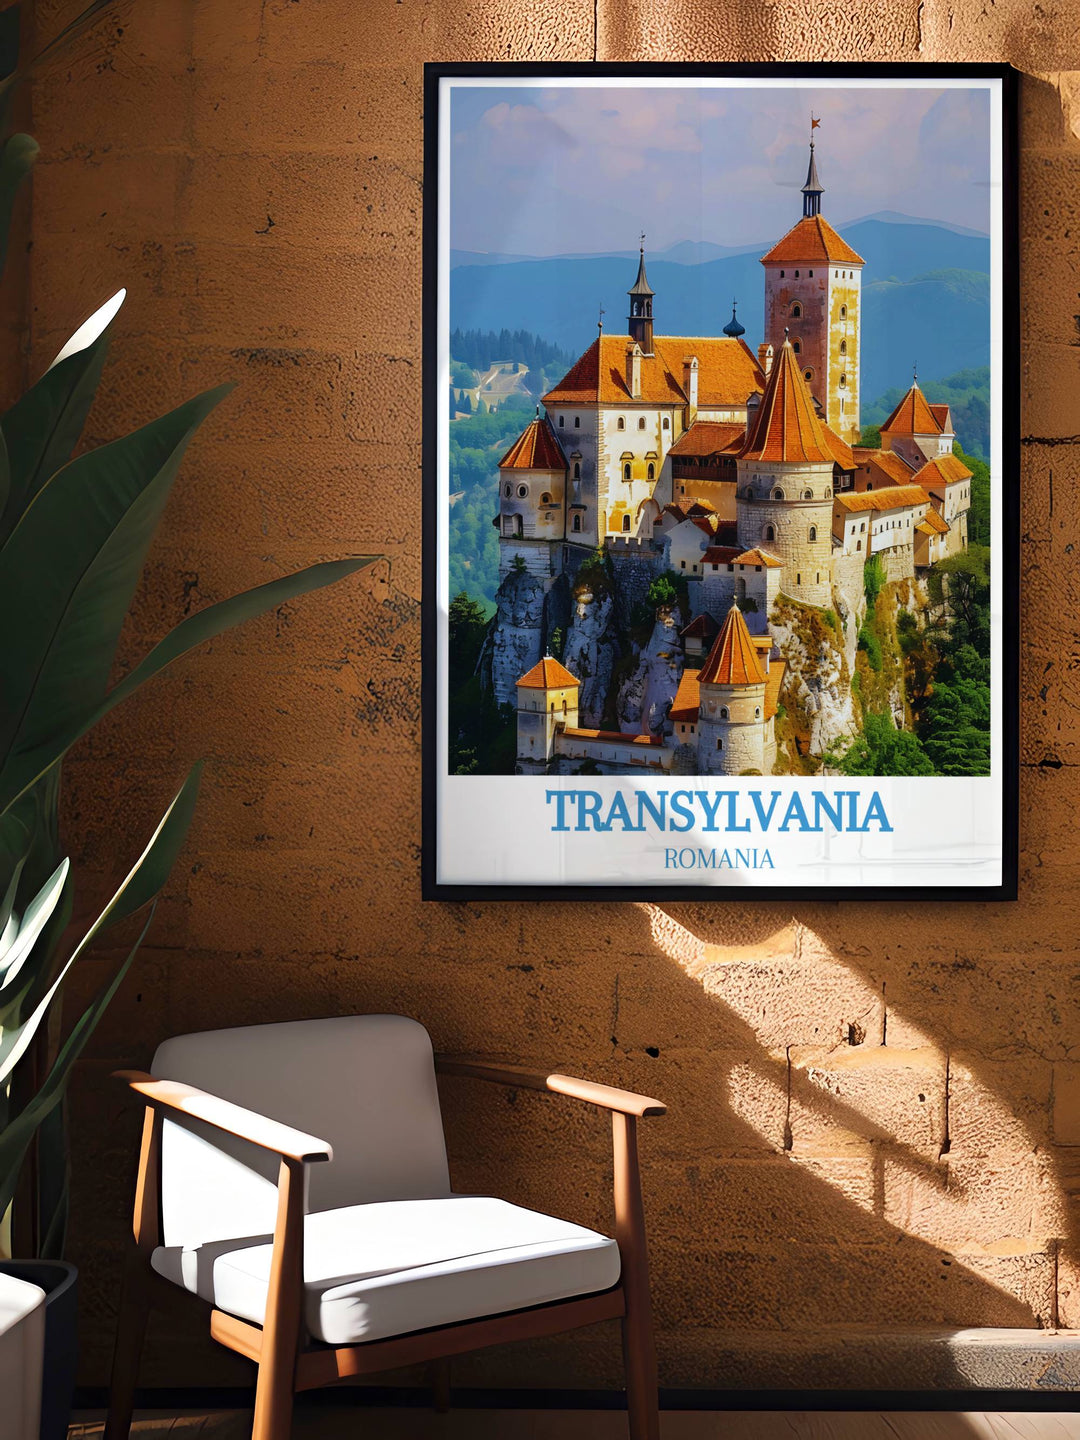 Romania travel posters of Bran Castle, showcasing the gothic splendor and historical significance of this iconic fortress, with high quality prints that make a standout addition to any room or office.